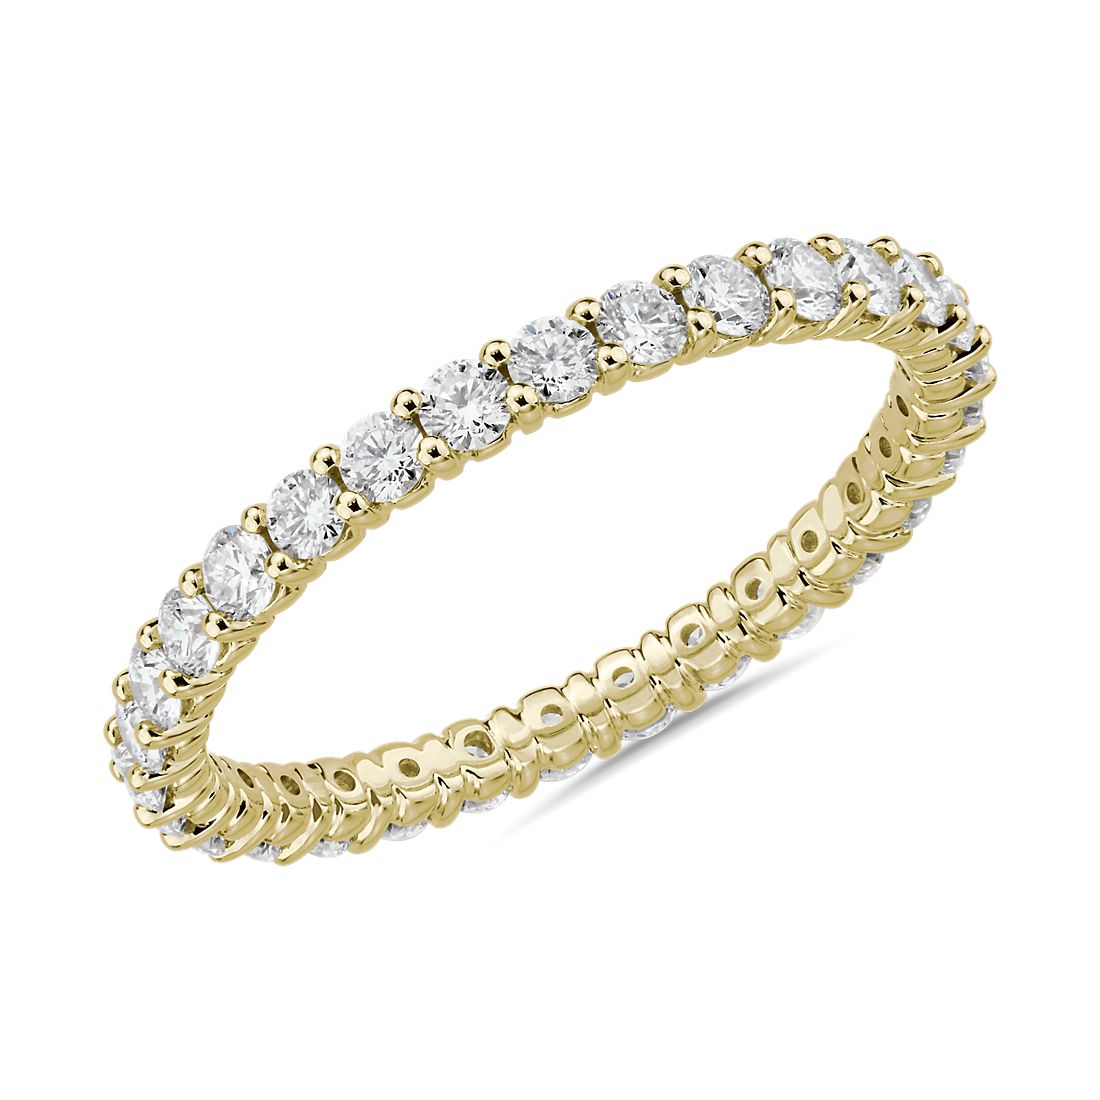 Comfort Fit Round Brilliant Diamond Eternity Ring in 14k Yellow Gold (1 ct. tw.)